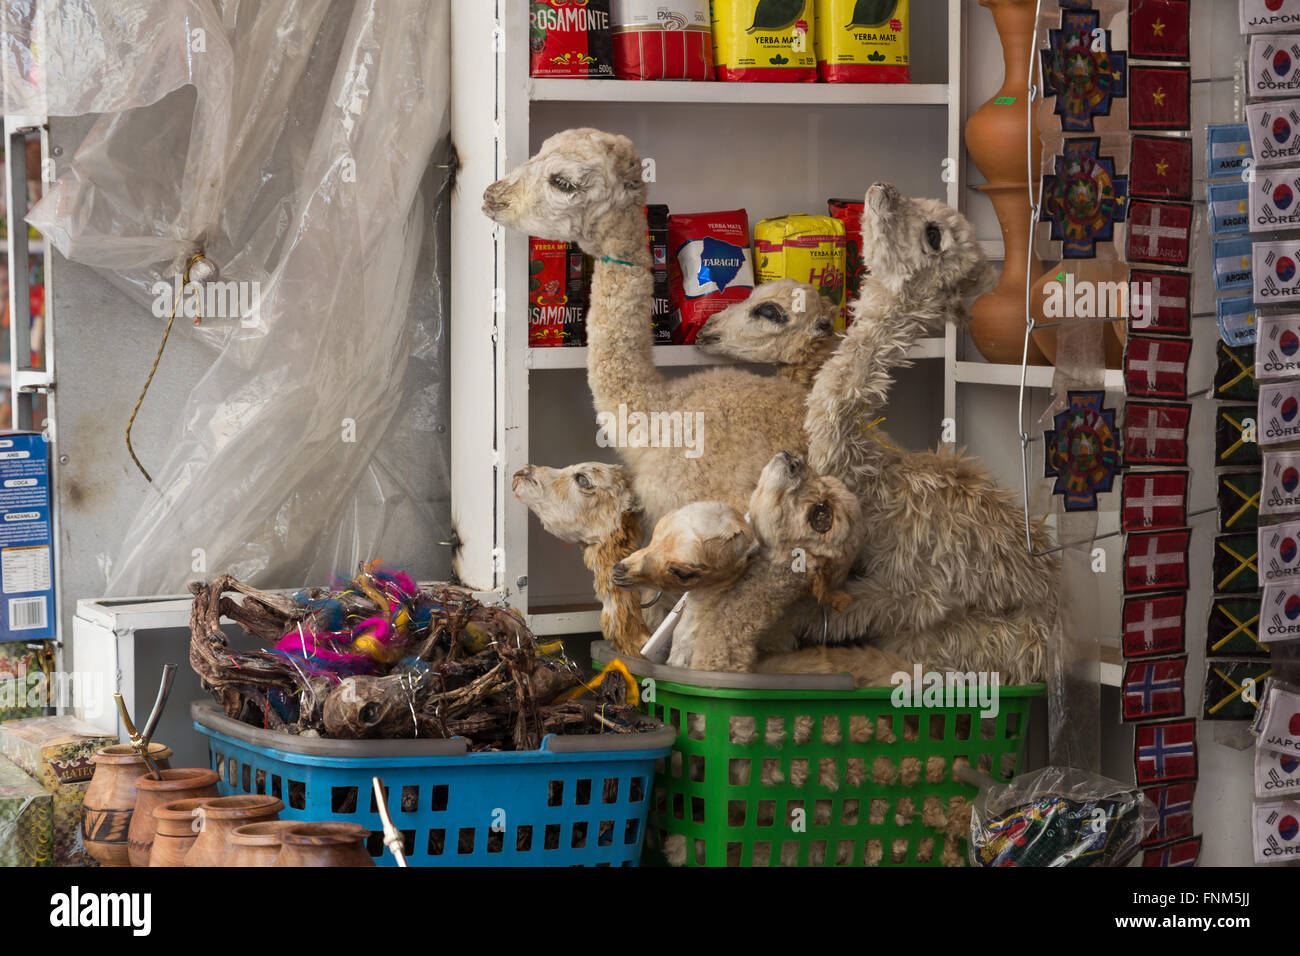 La Paz, Bolivia - October 24, 2015: Dried baby llama foetuses at the Witches Market. Stock Photo